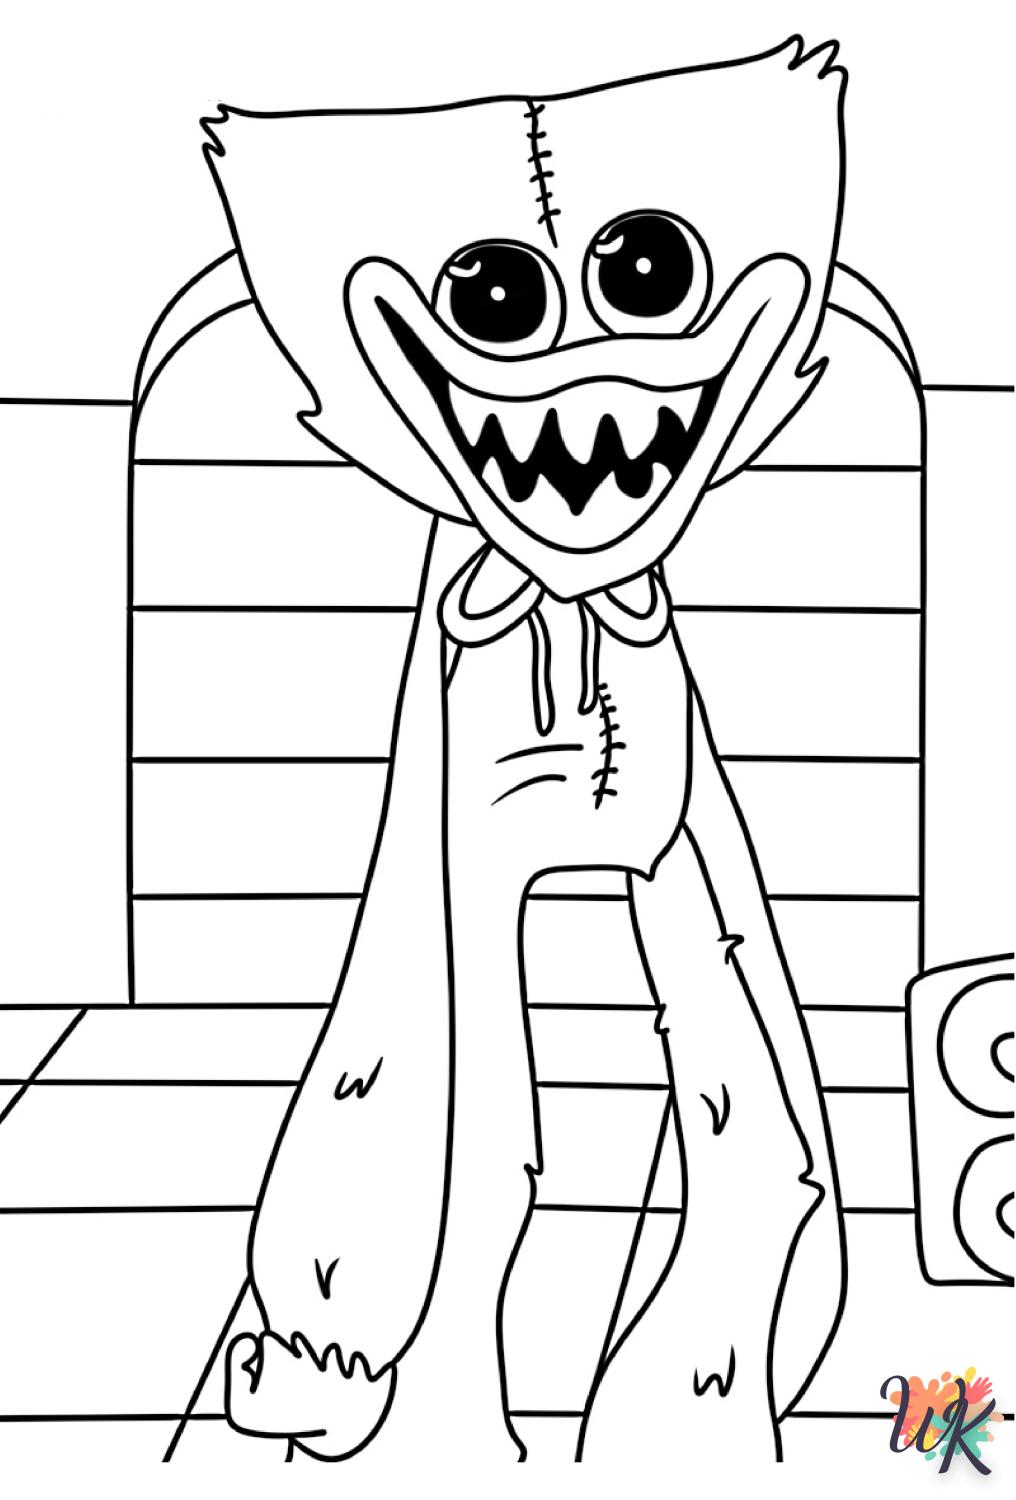 Huggy Wuggy coloring pages printable free